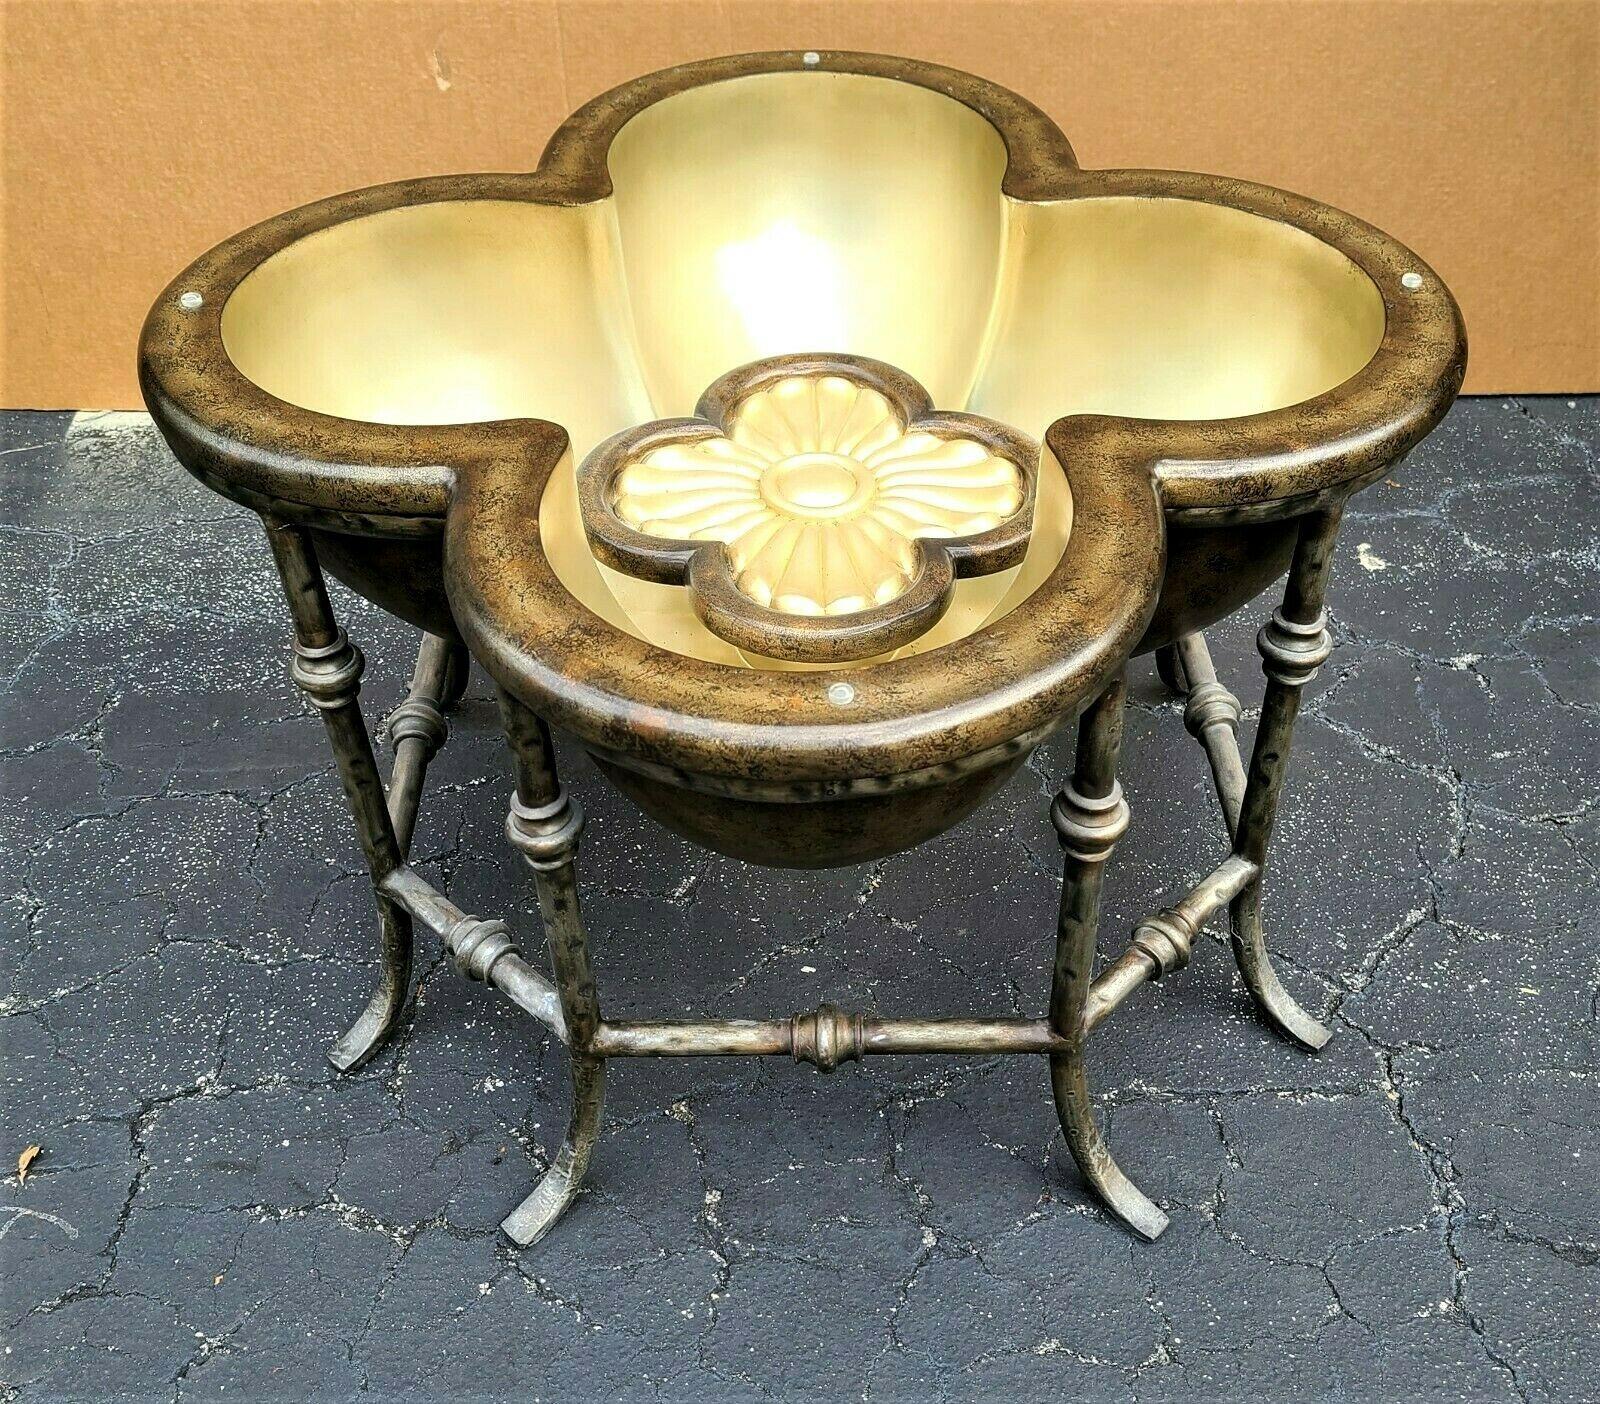 Offering one of our recent palm beach estate fine furniture acquisitions of a
3 dimensional lotus flower glass top indoor outdoor cocktail coffee side end table
Aluminum frame with fiberglass Lotus Flower insert so it can be used anywhere.

(We